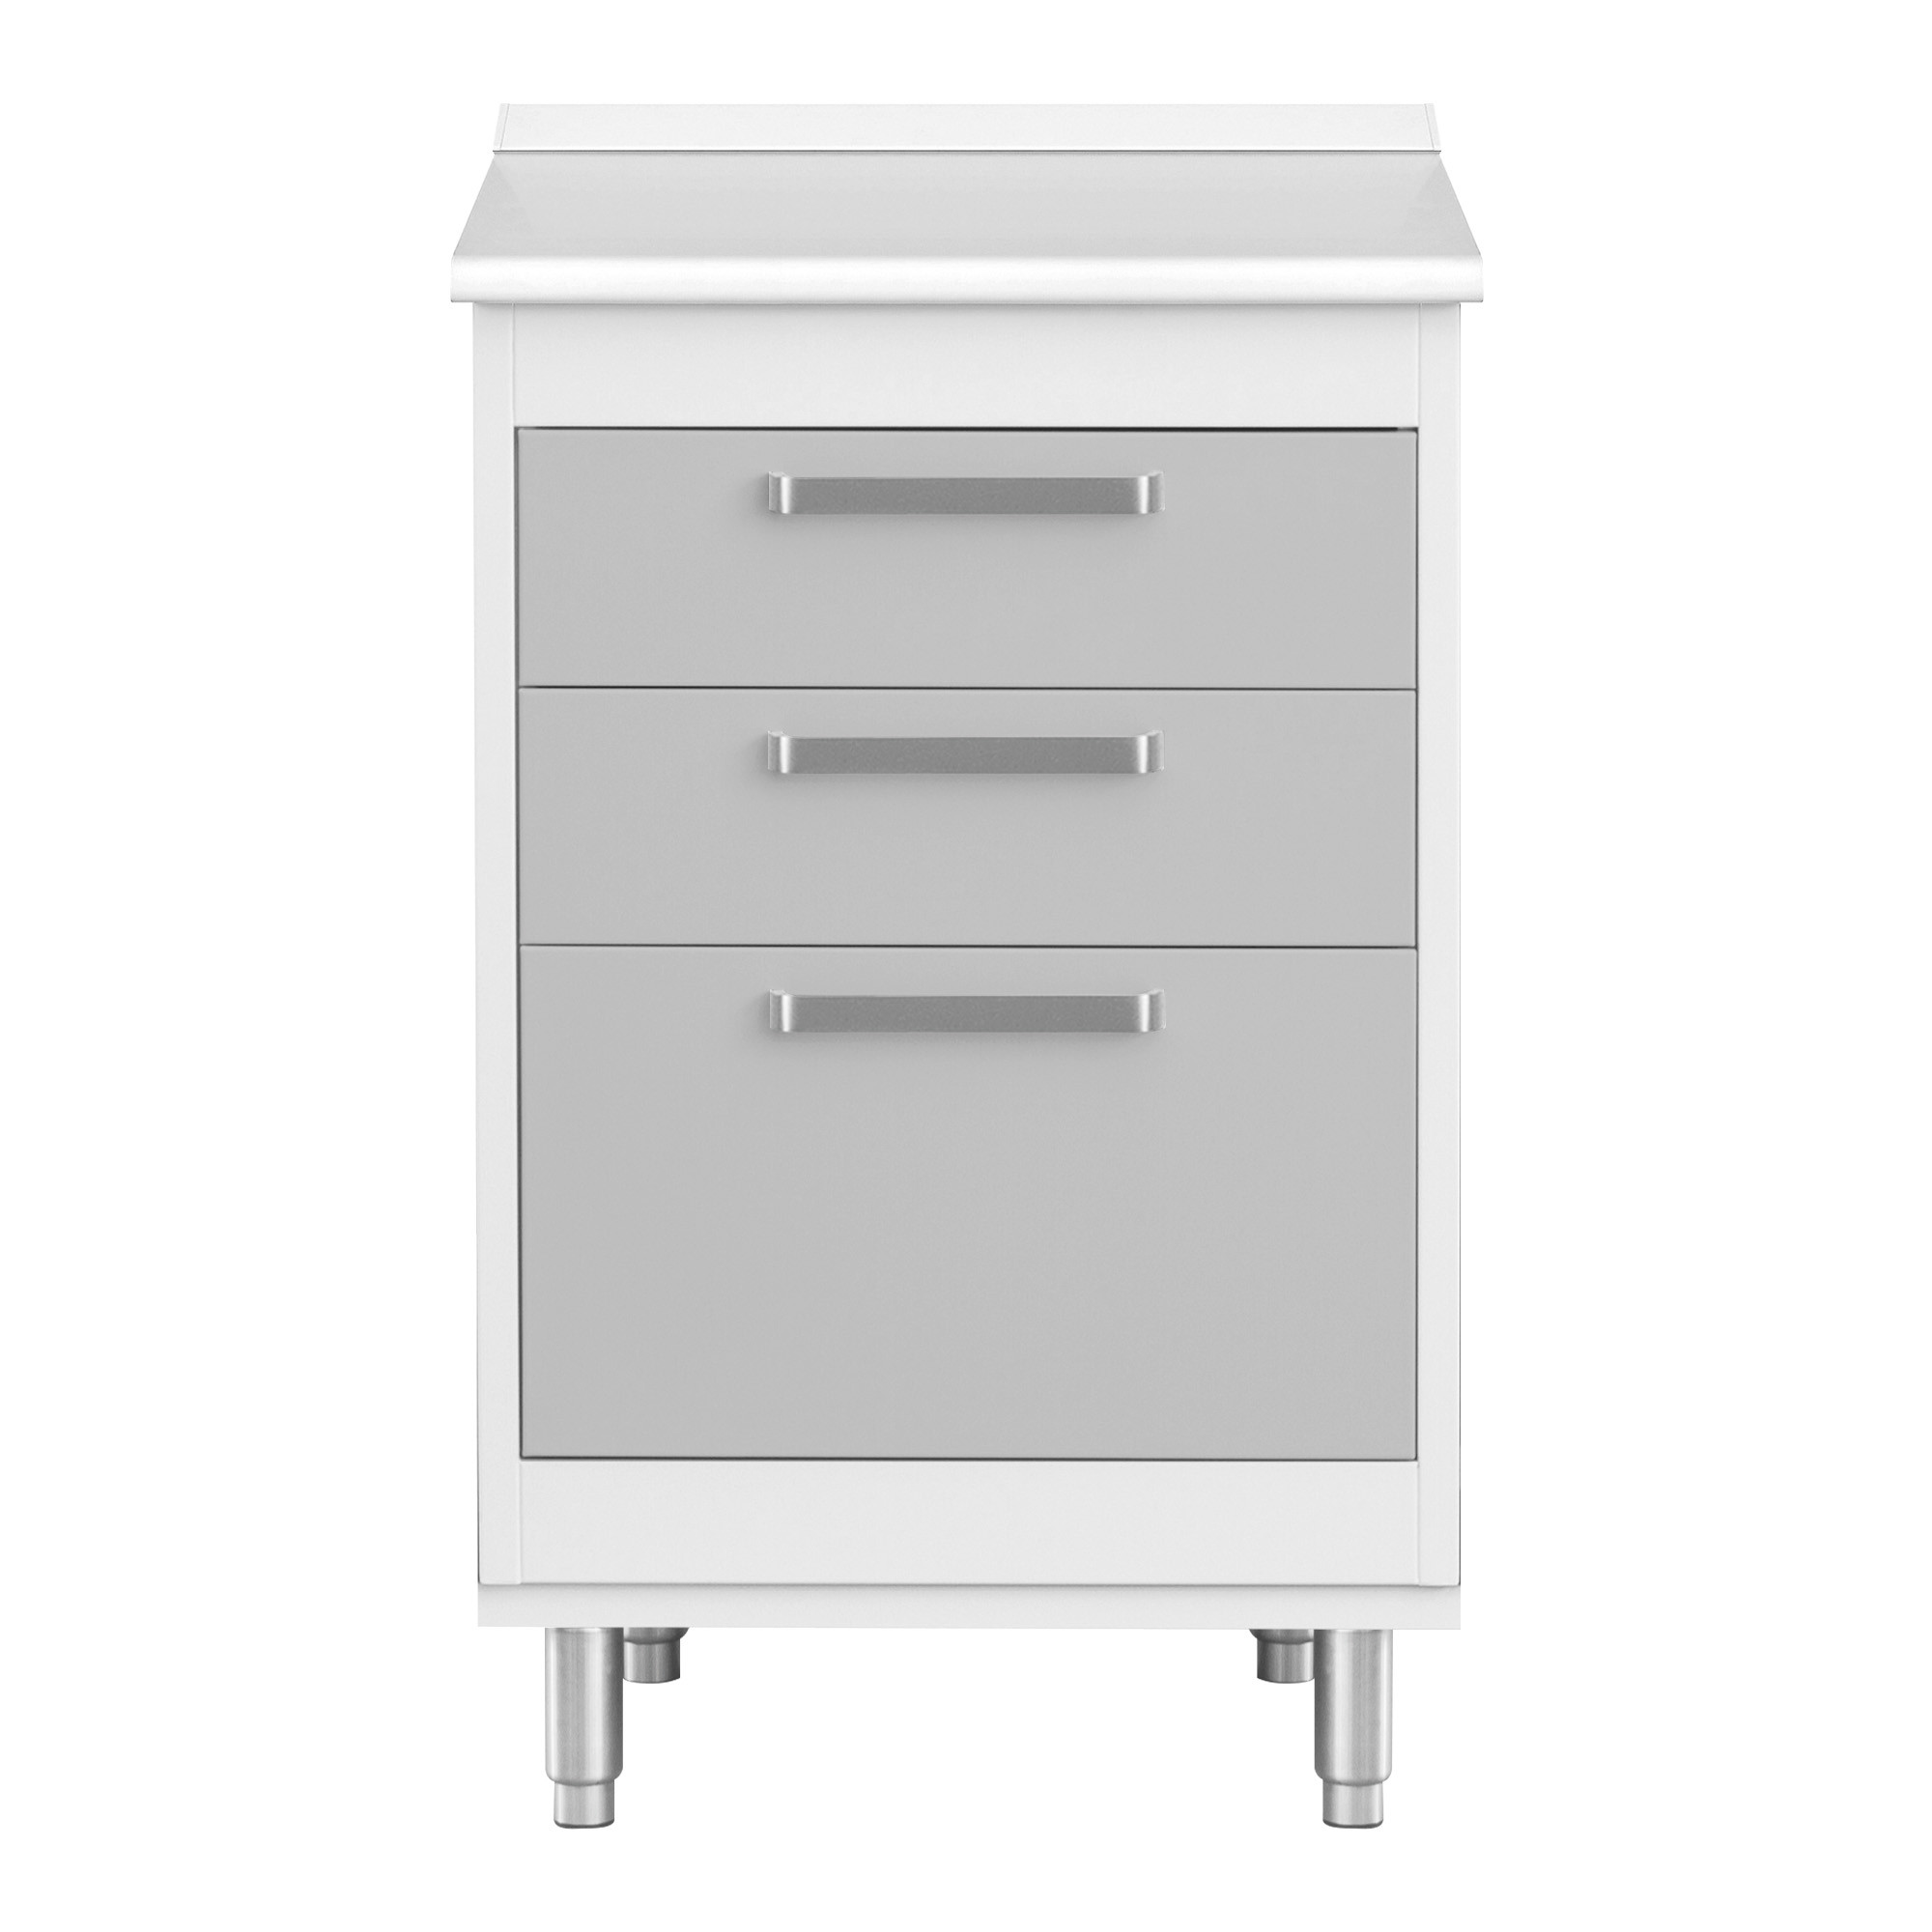 Module with 3 drawers and feet